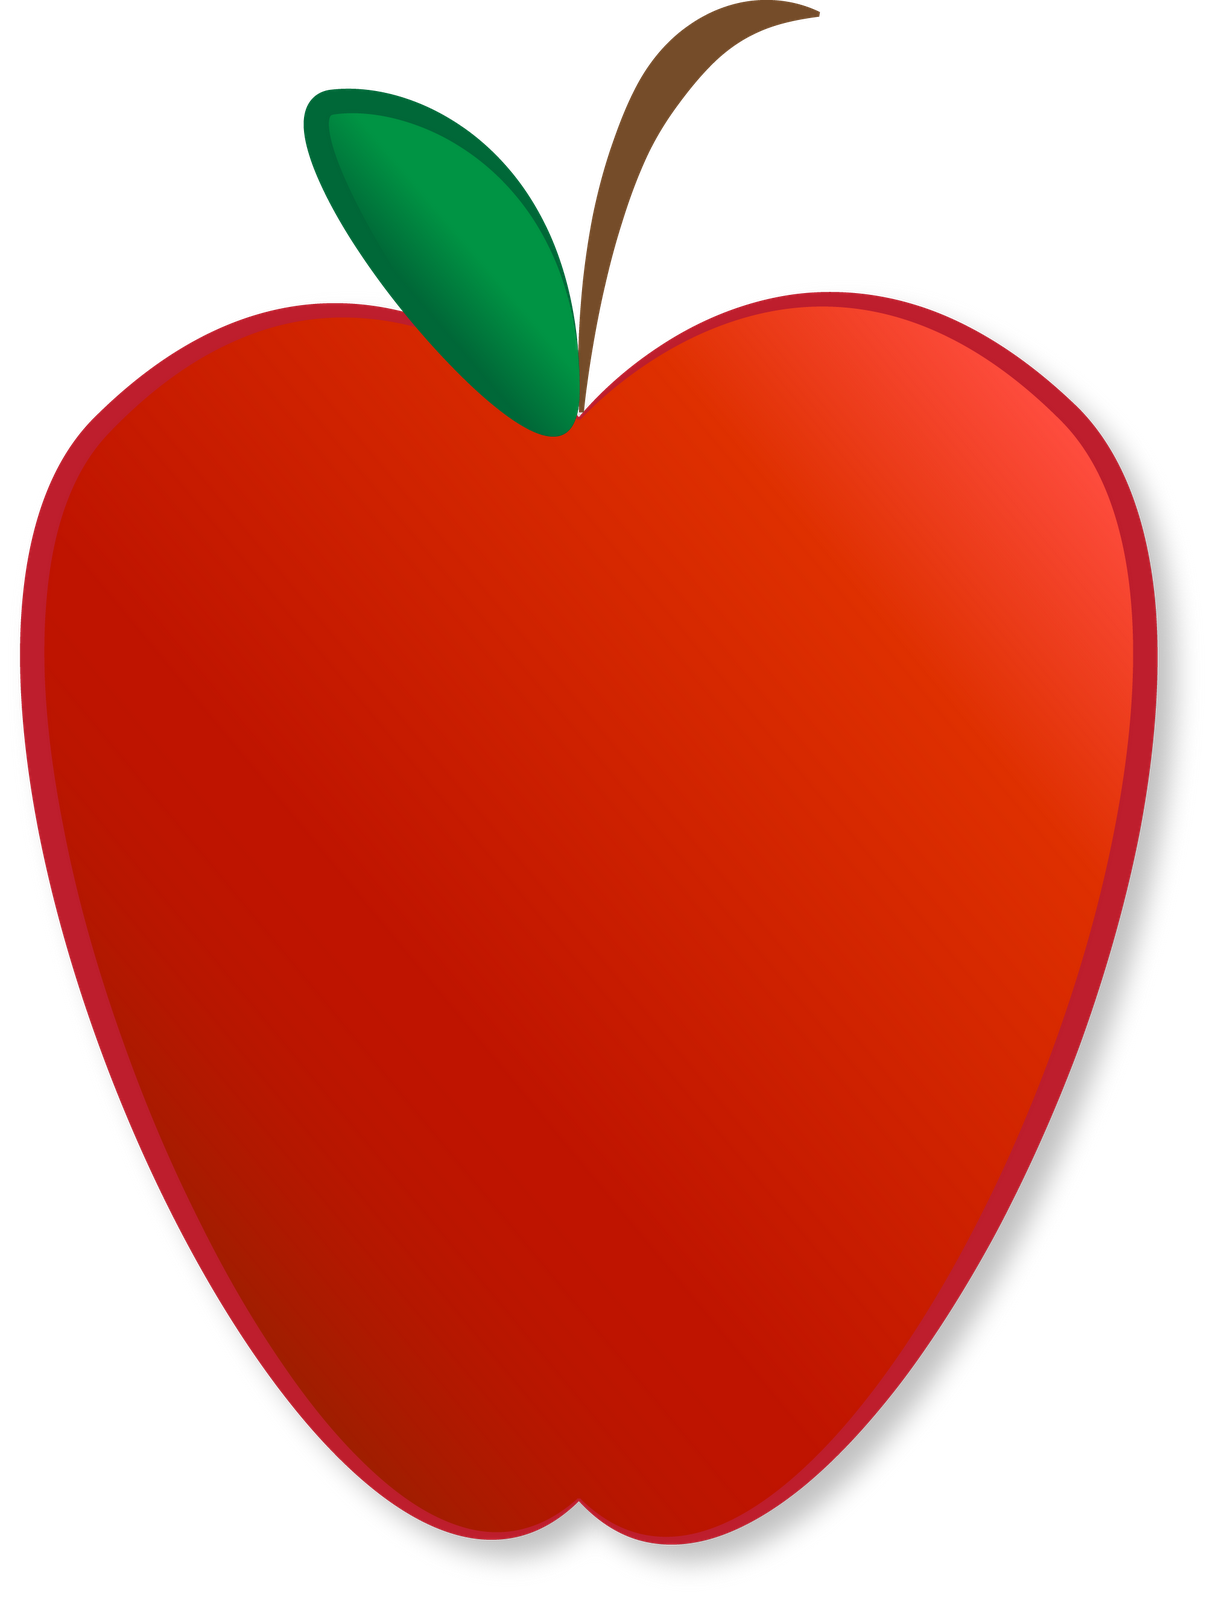 apple back to school clipart - photo #26